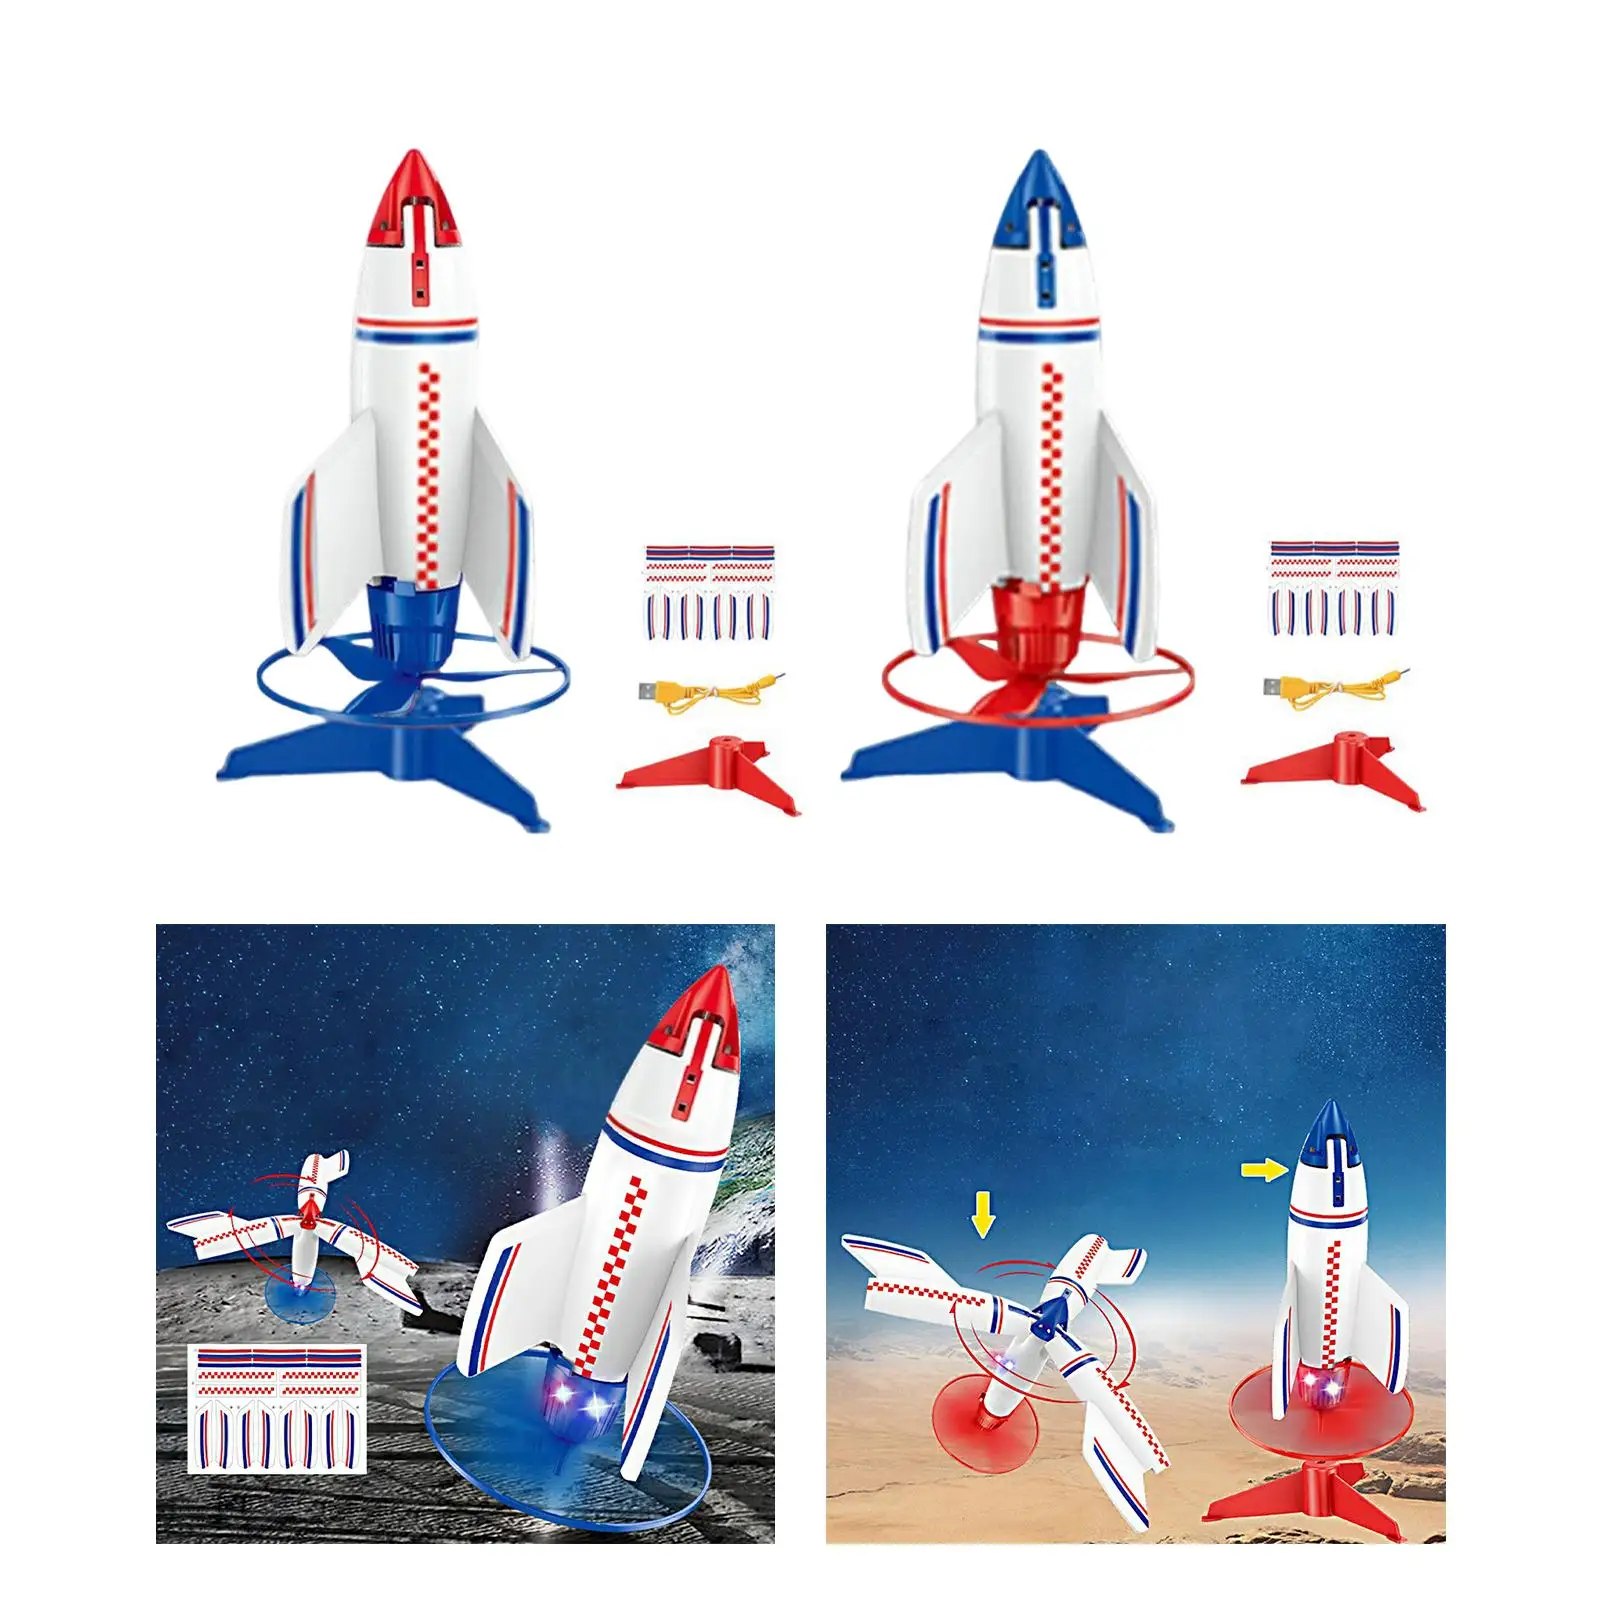 rocket Launcher Toys Fly higher Launching Rocket Toys Rockets Model Summer Outdoor Beach Toys for boys Toddlers